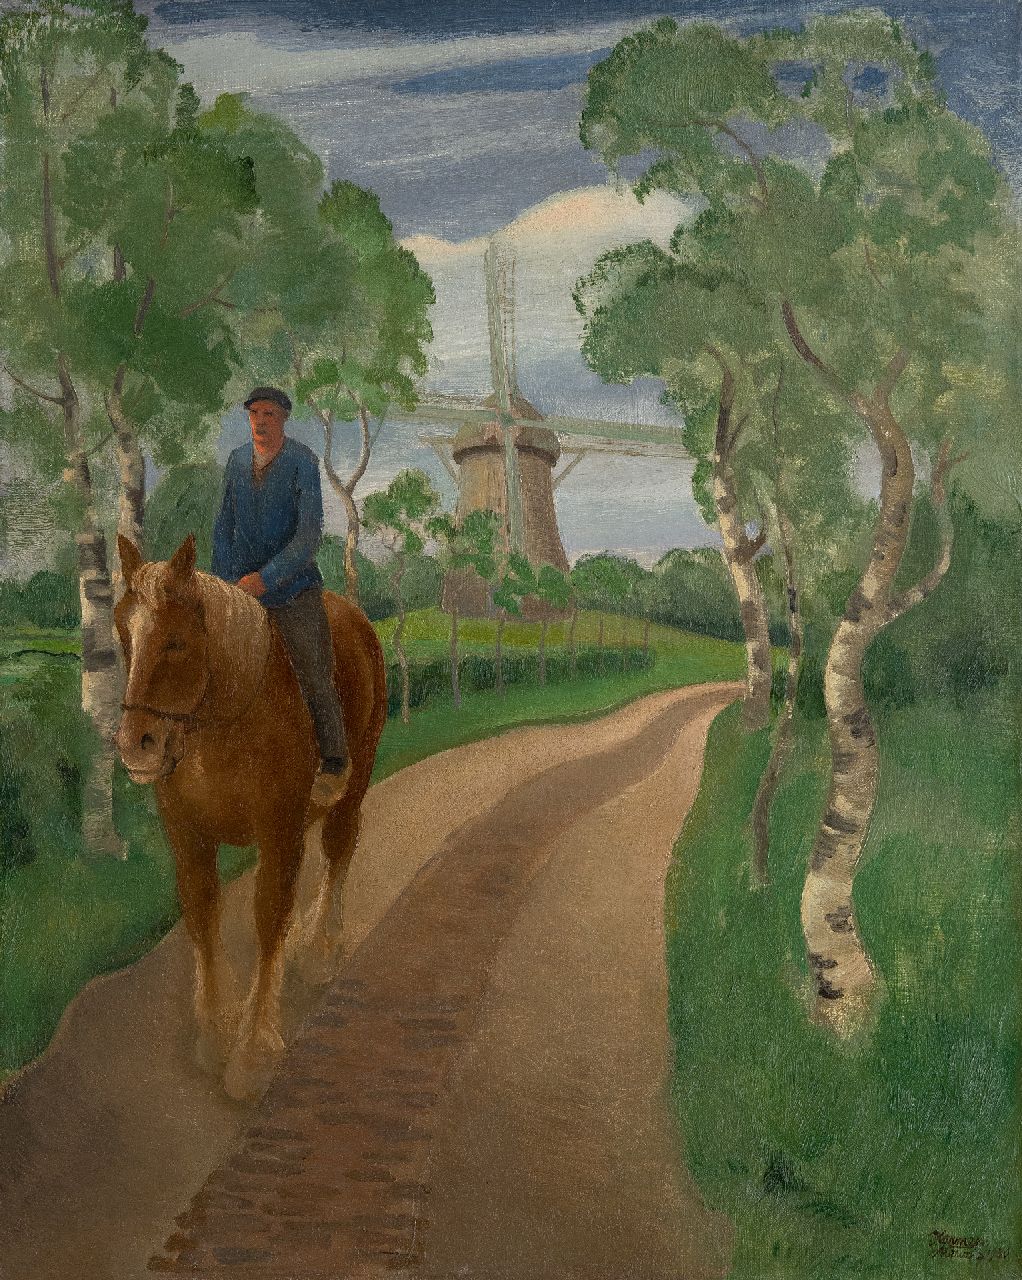 Meurs H.H.  | 'Harmen' Hermanus Meurs, The mill path, oil on canvas 55.2 x 46.0 cm, signed l.r. and dated 1930